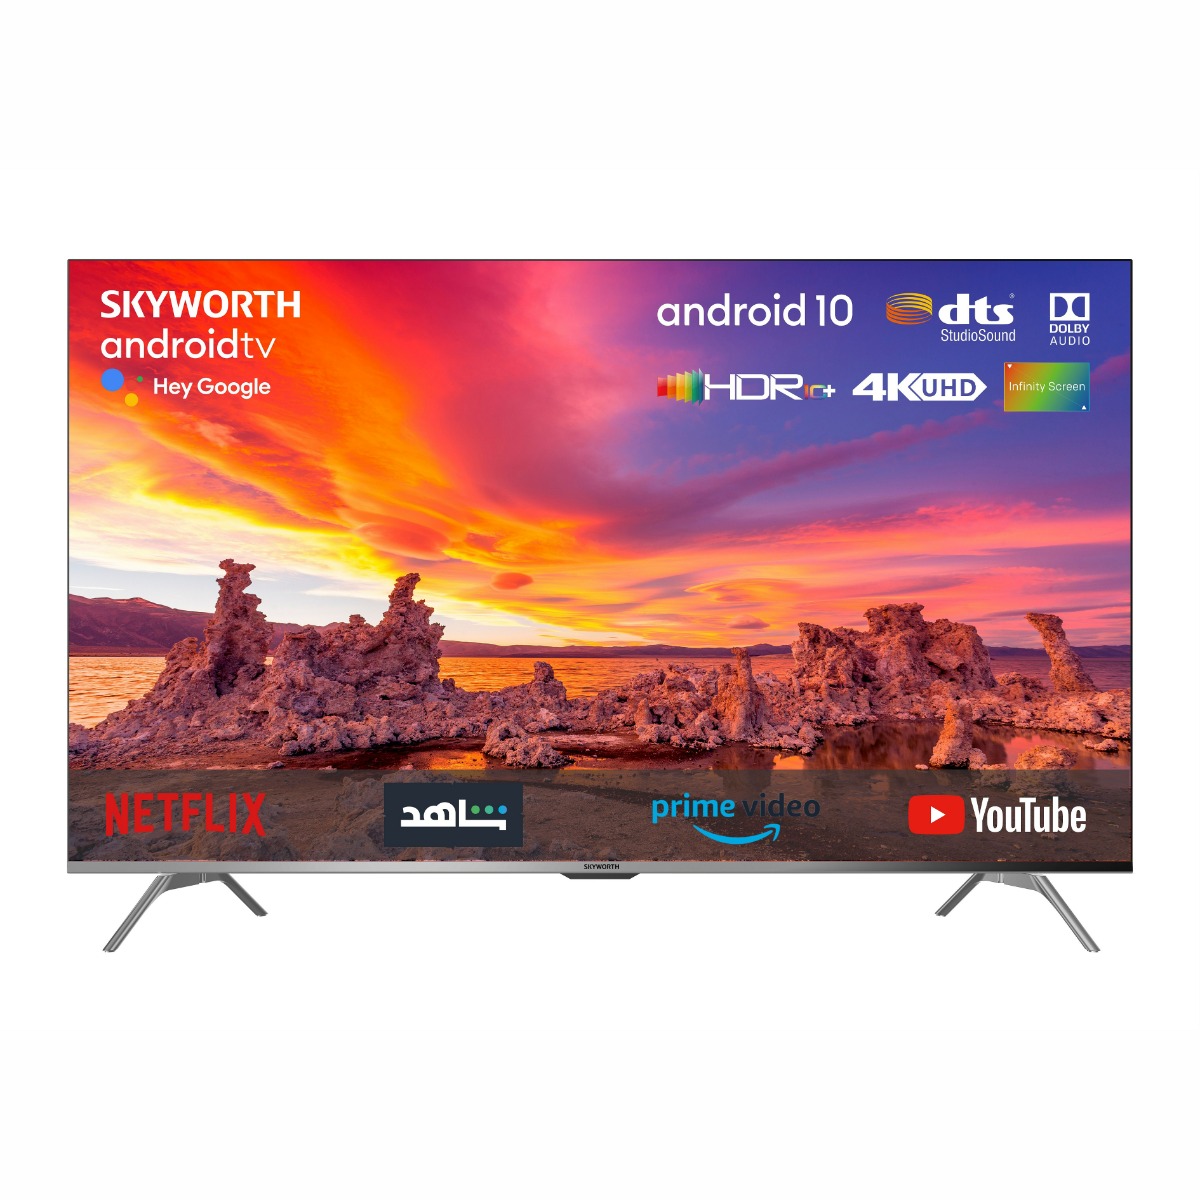 Skyworth 65inch UHD 4K, HDR 10, SMART, Android 10, LED TV- 65SUC9300